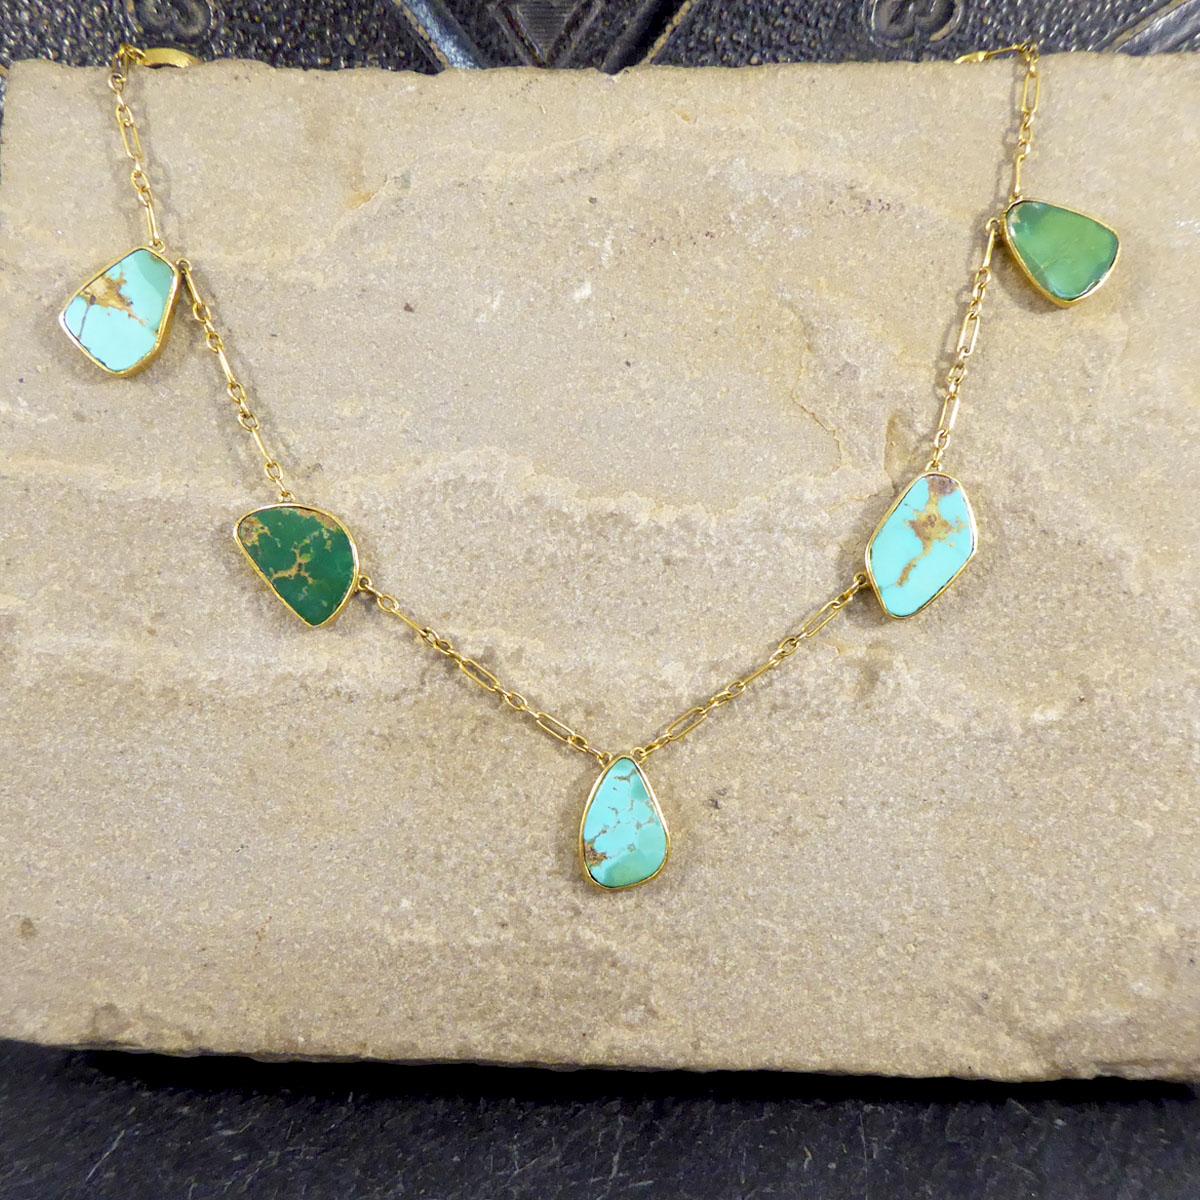 A lovely antique necklace that has been crafted in the Edwardian era with individual Turquoise stones in a rub over collar setting. The setting and chain itself is made form 15ct Yellow Gold and has a delicate and elegant feel to it.

Condition: